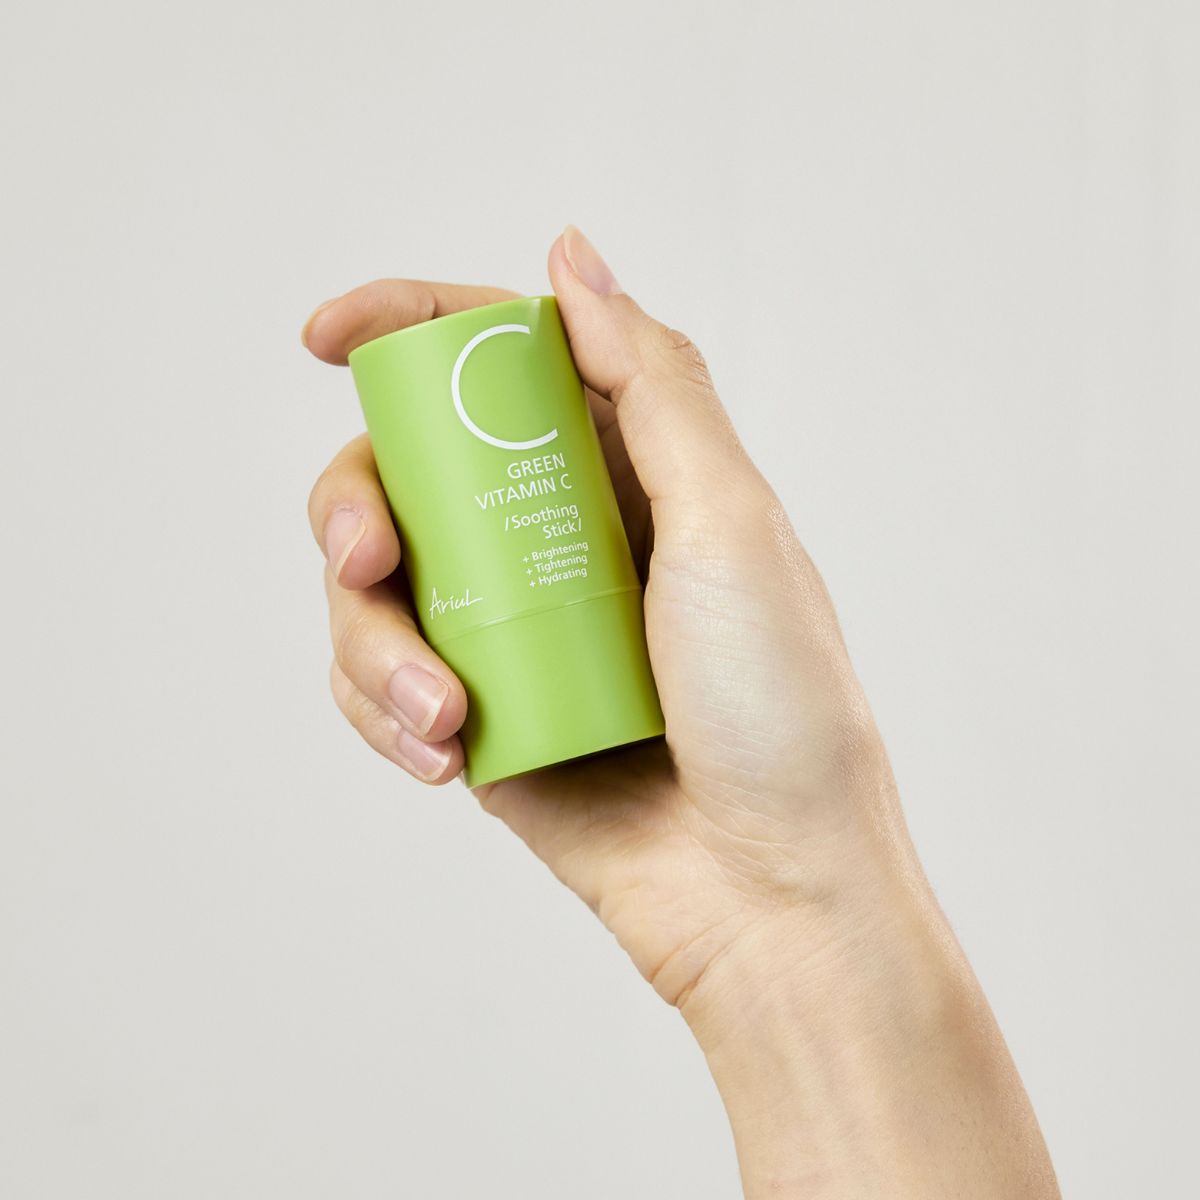 GREEN VITAMIN C SOOTHING STICK